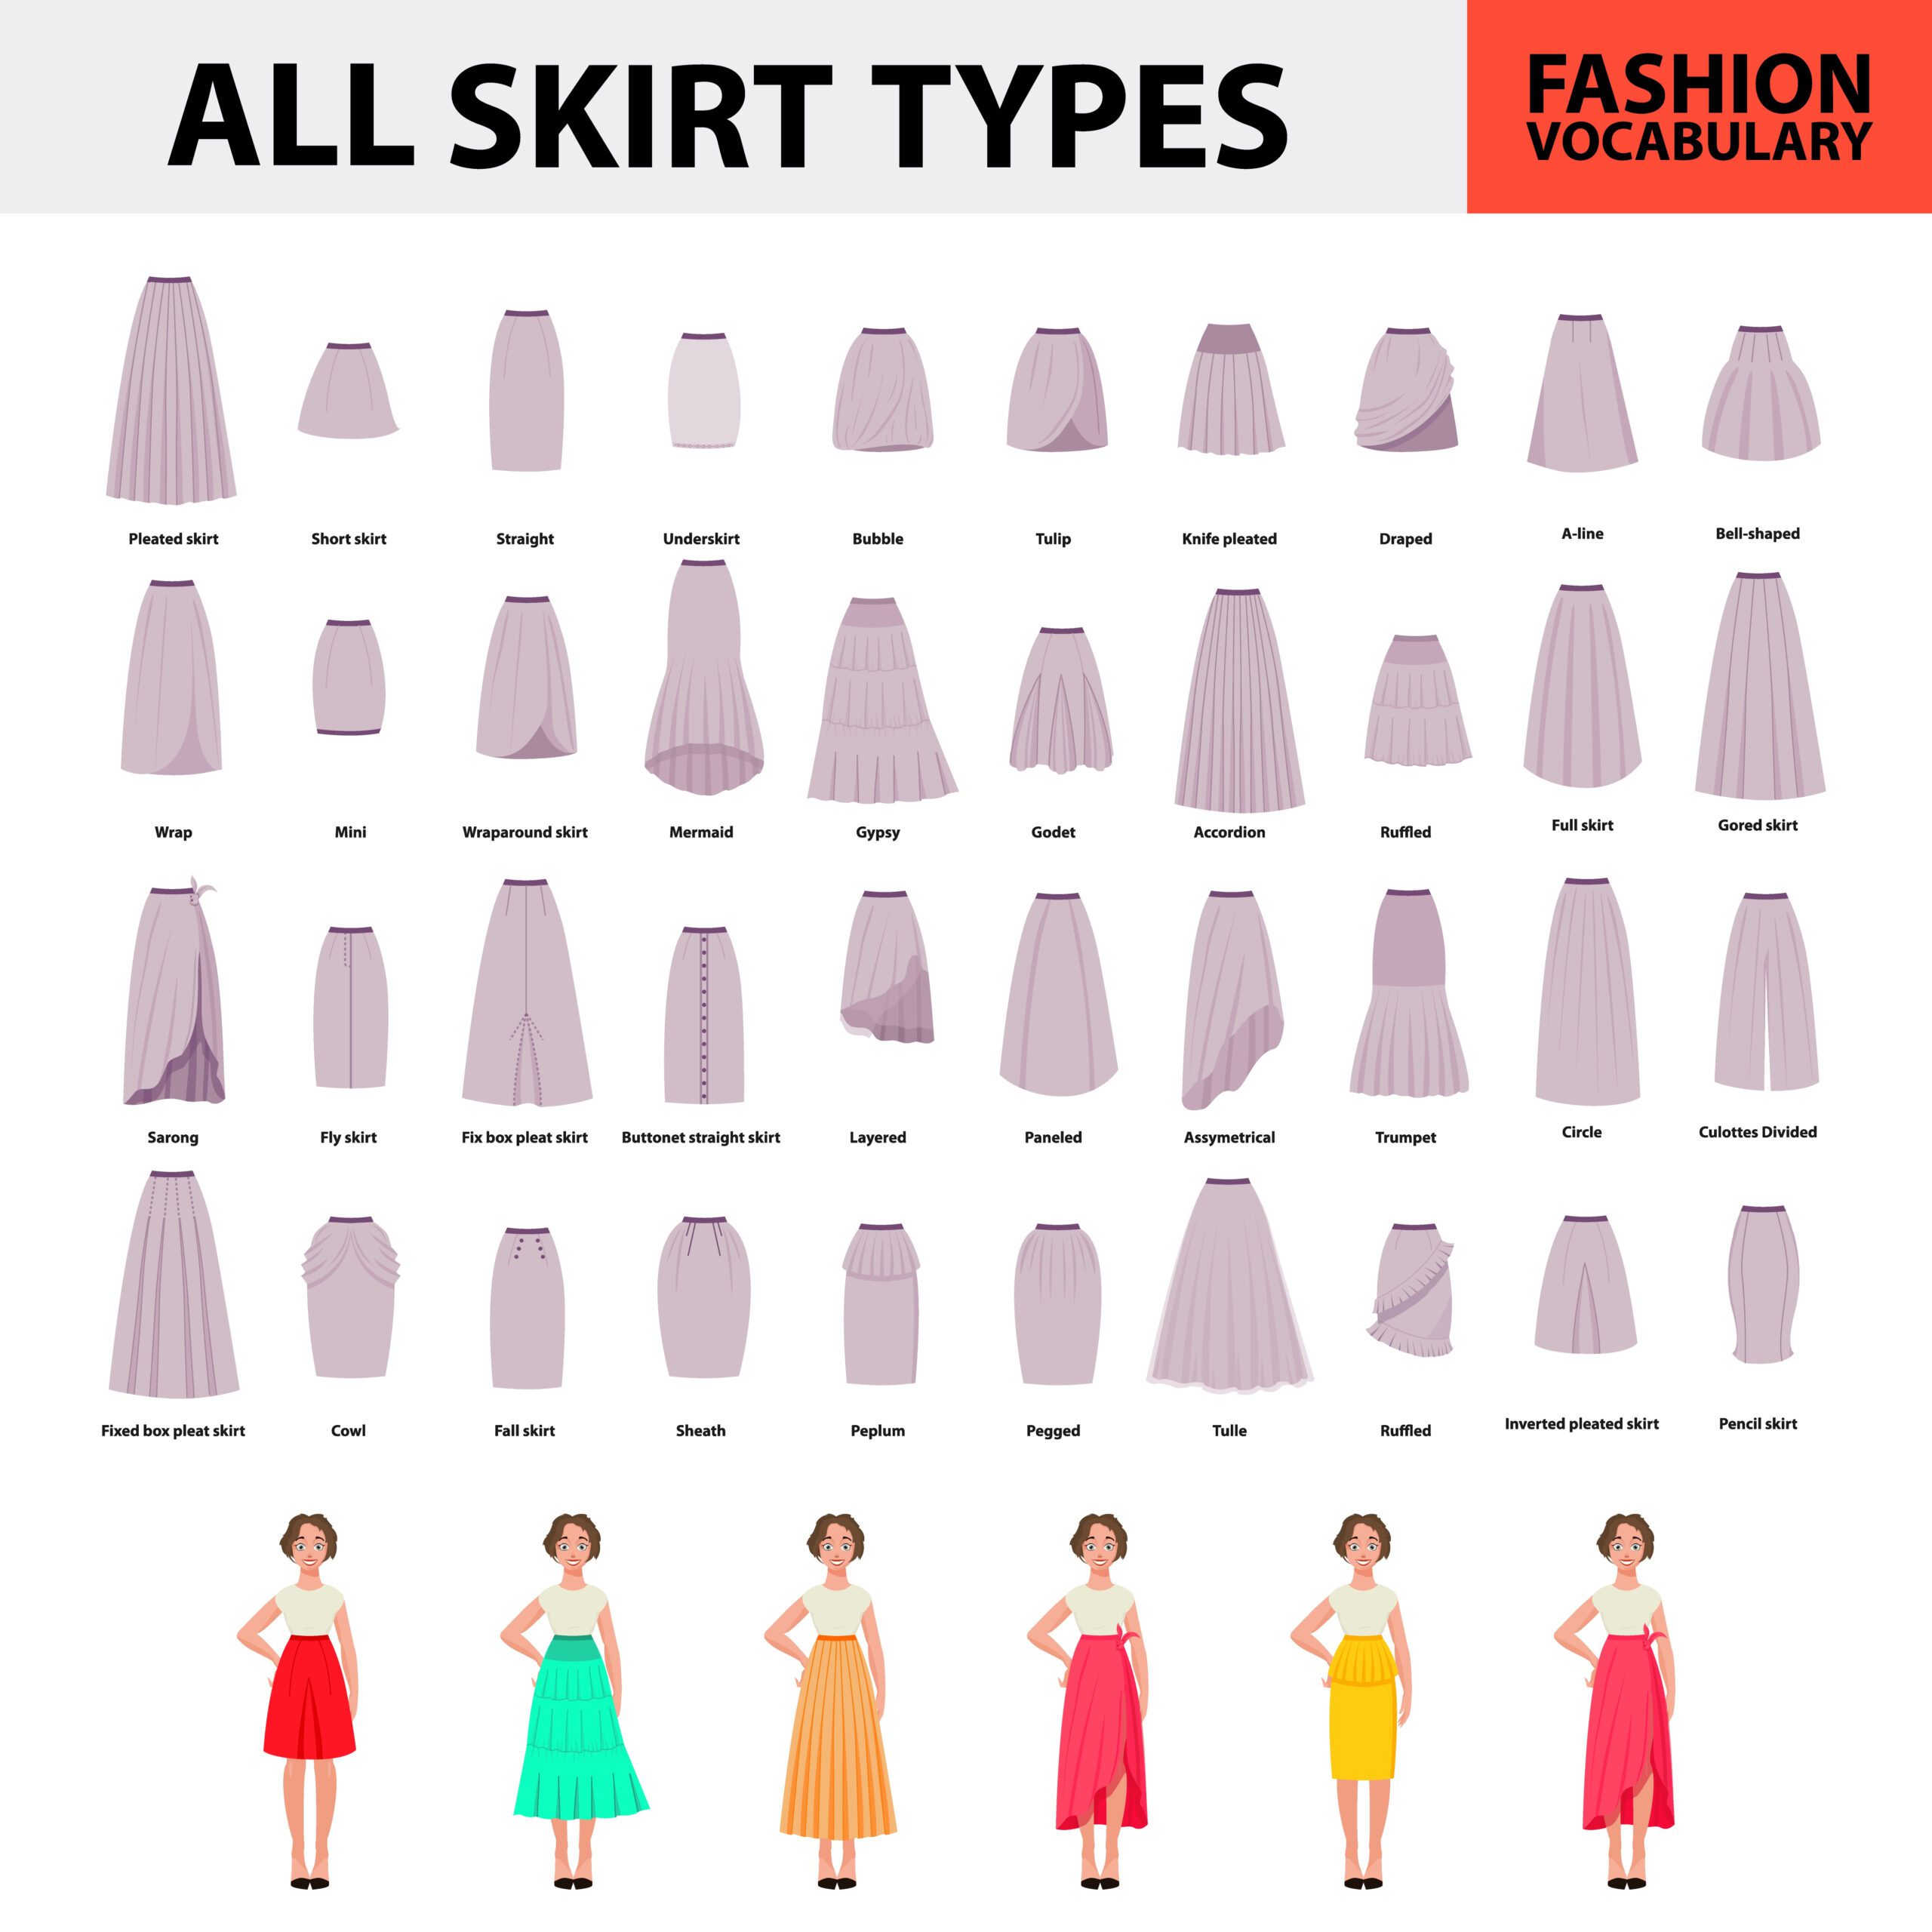 Choosing The Right Skirt For Your Figure